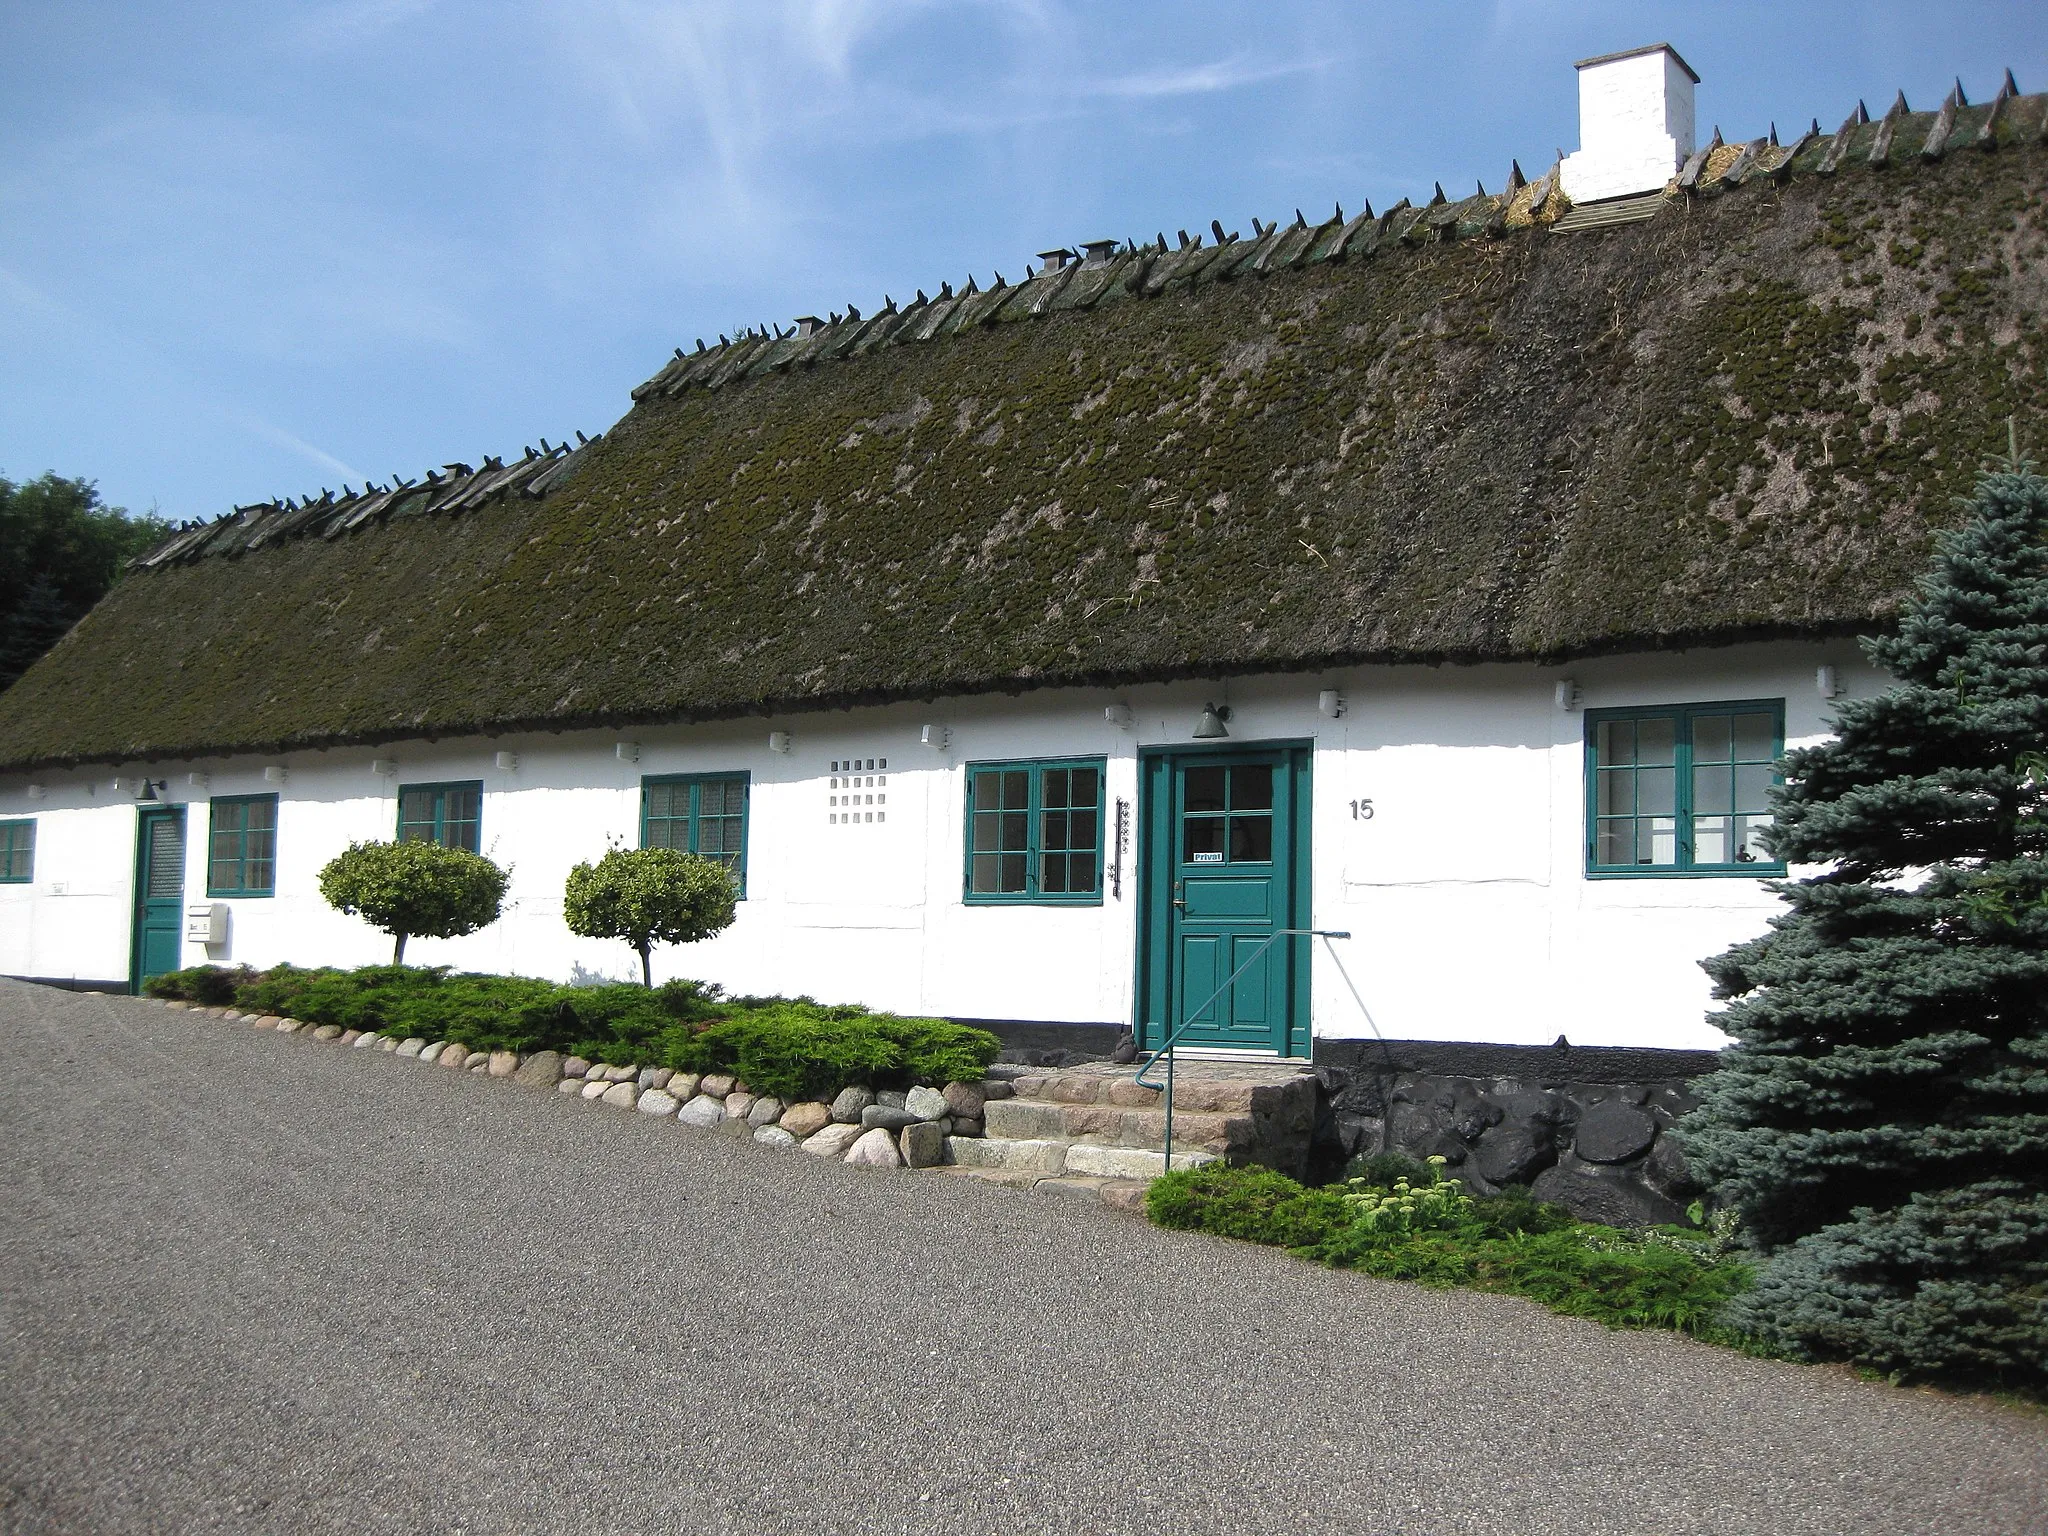 Photo showing: The museum "Grundtvigs Mindestuer" in the village "Udby". The village is located on South Zealand in east Denmark.